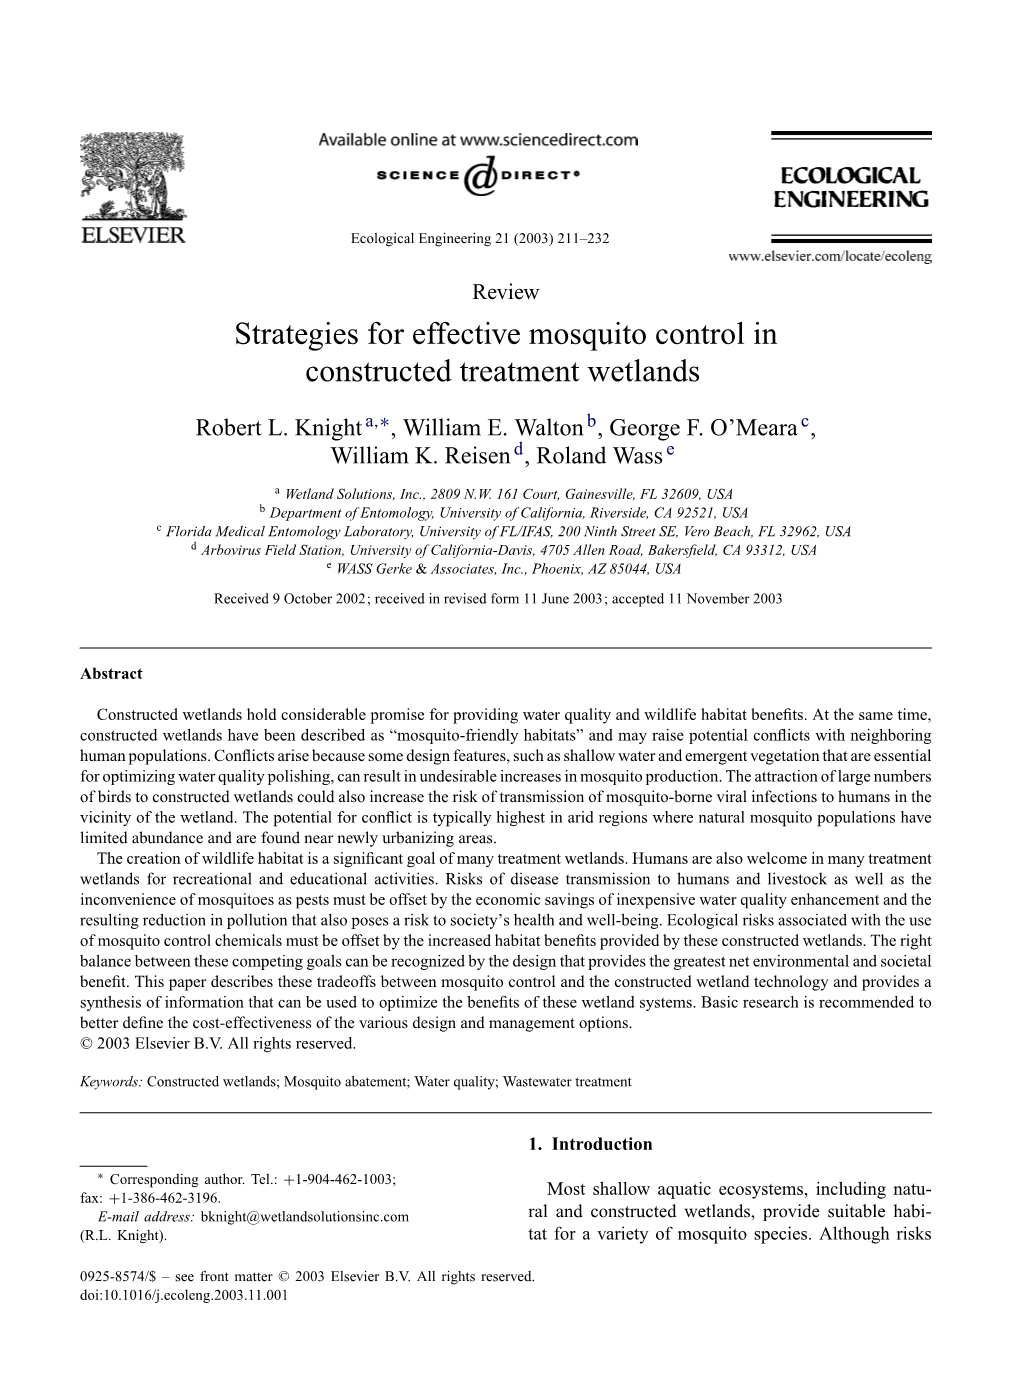 Strategies for Effective Mosquito Control in Constructed Treatment Wetlands